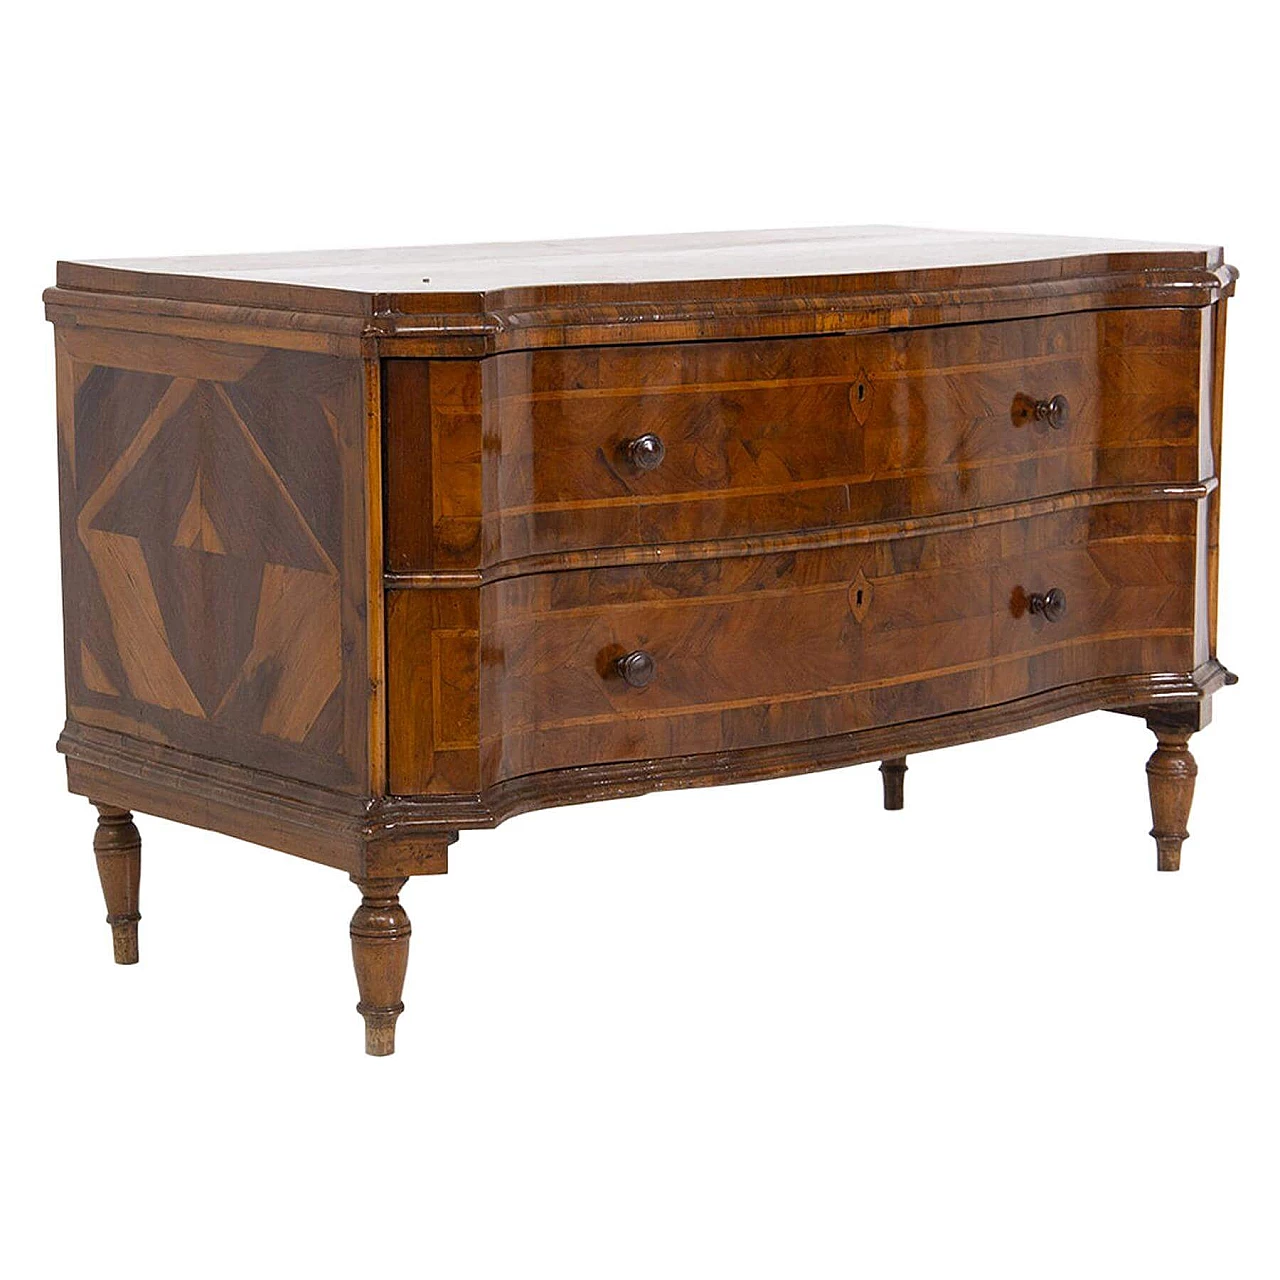 Walnut-root chest of drawers with inlaid decoration, 18th century 1408633